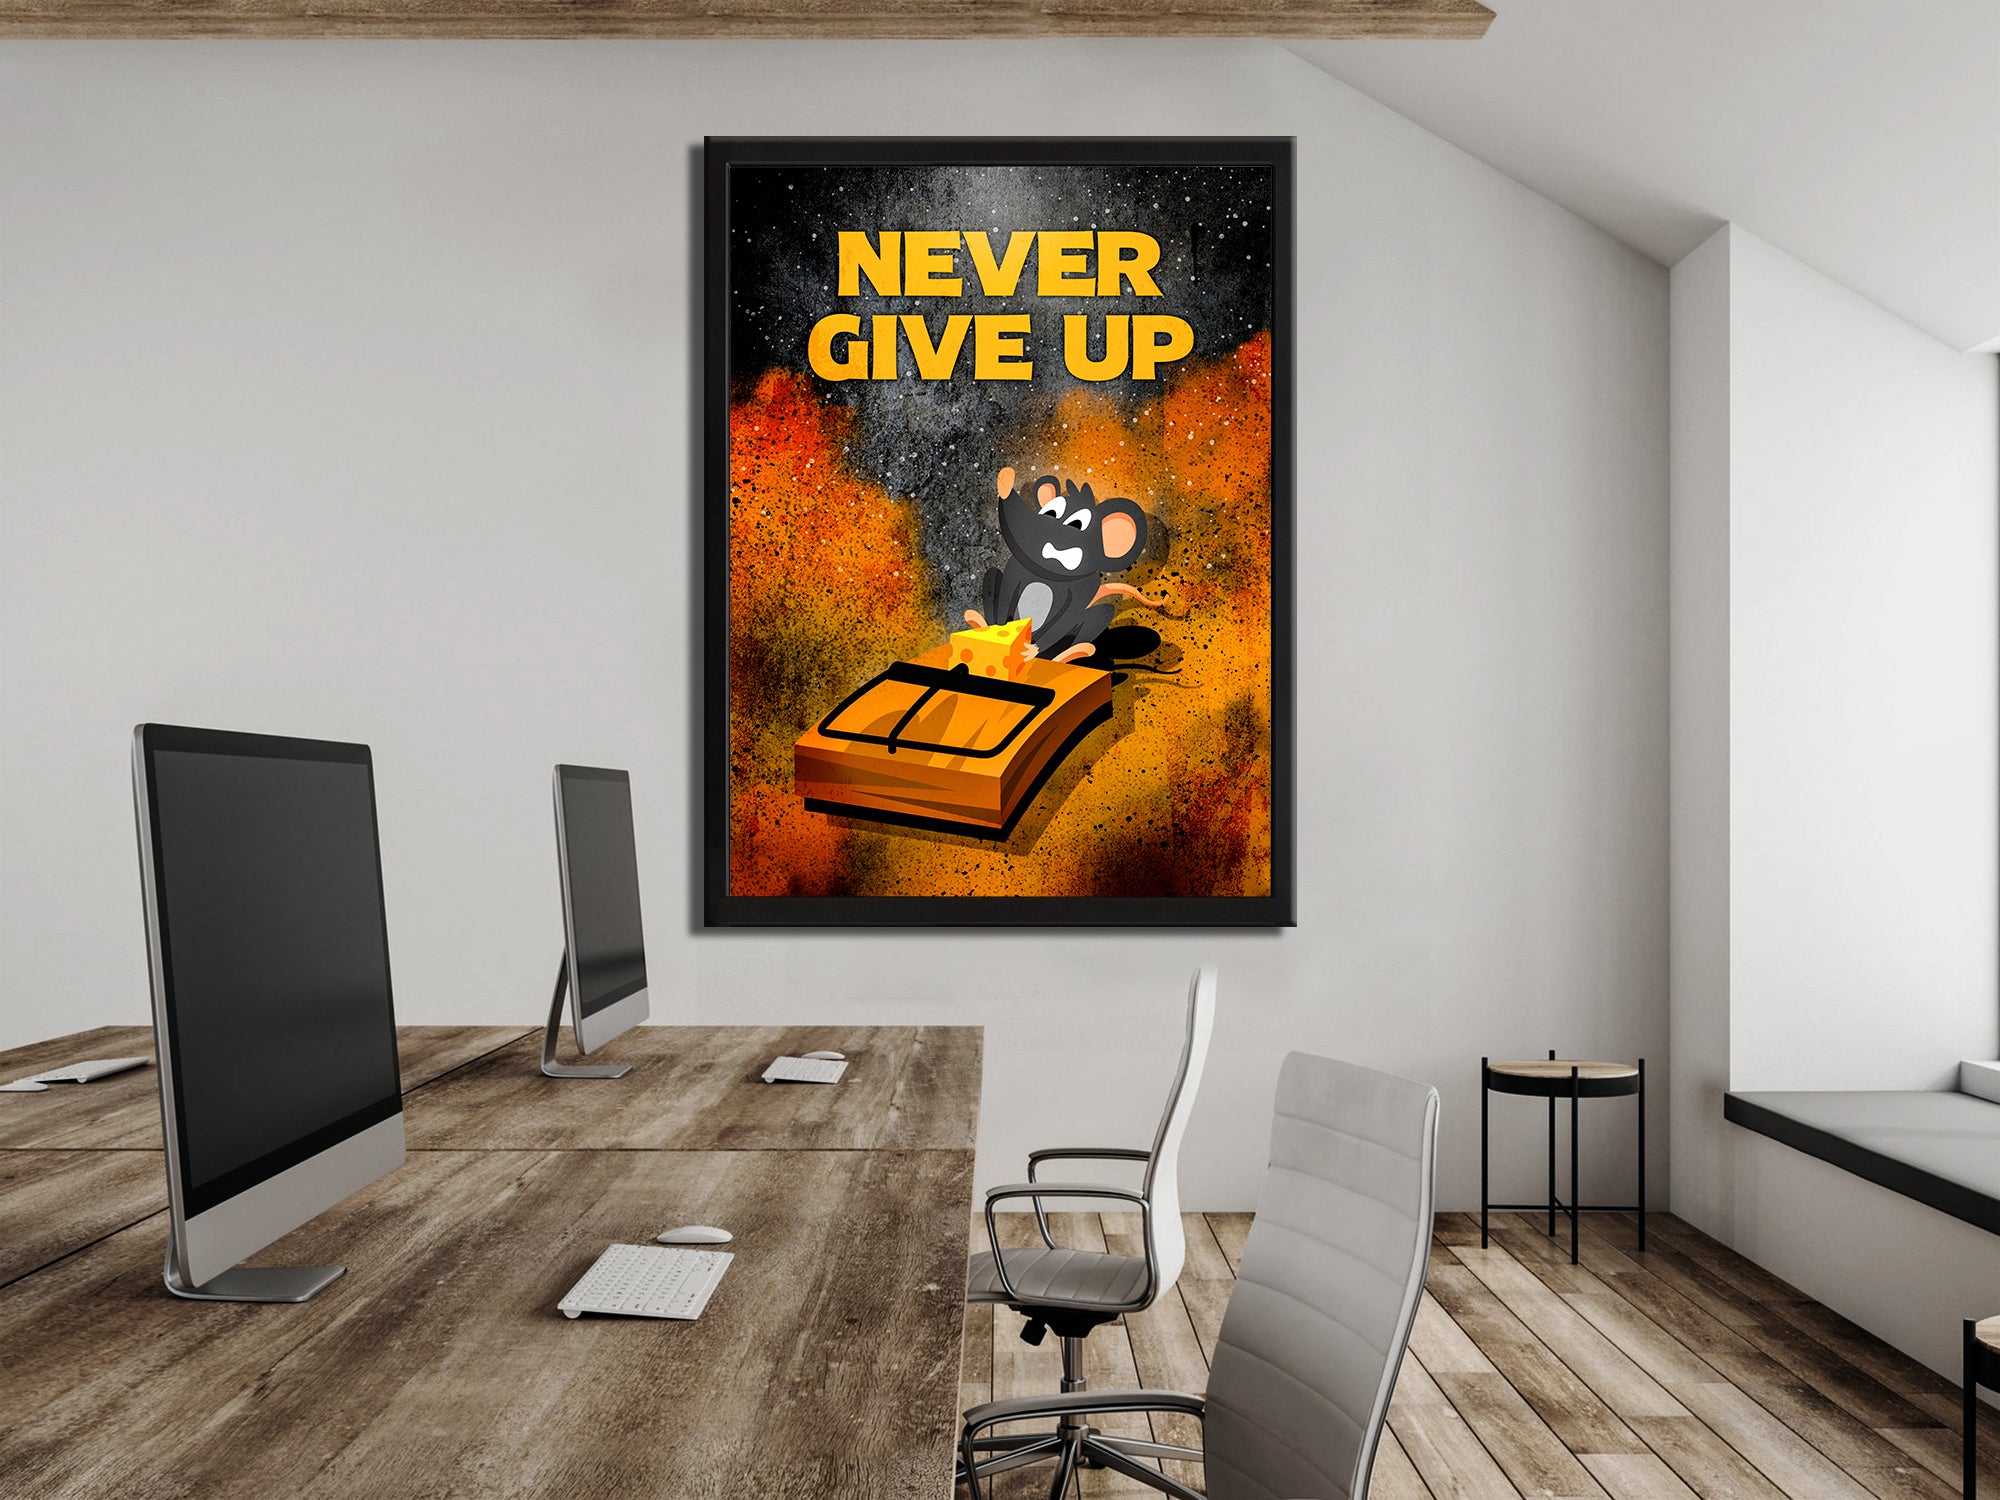 Never Give Up - Motivational - Canvas Wall Art